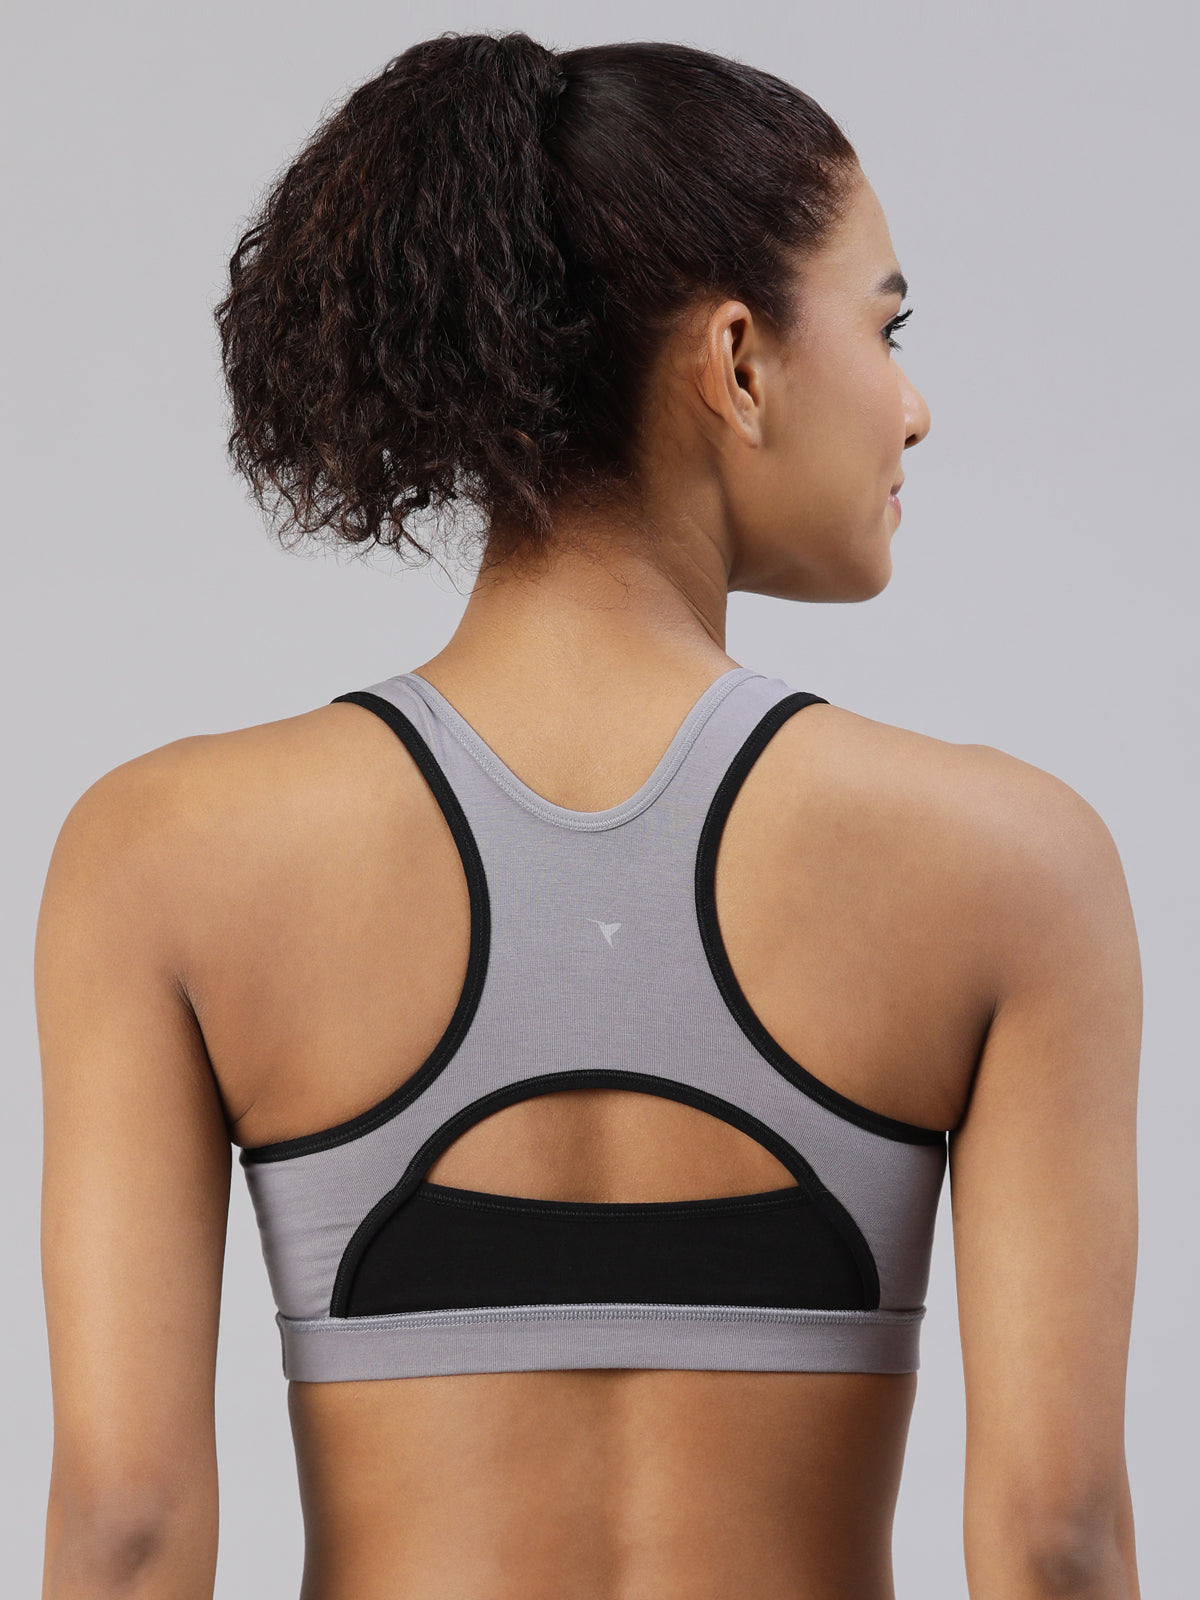 blossom-workout bra-silver grey3-Sports collection-utility based bra